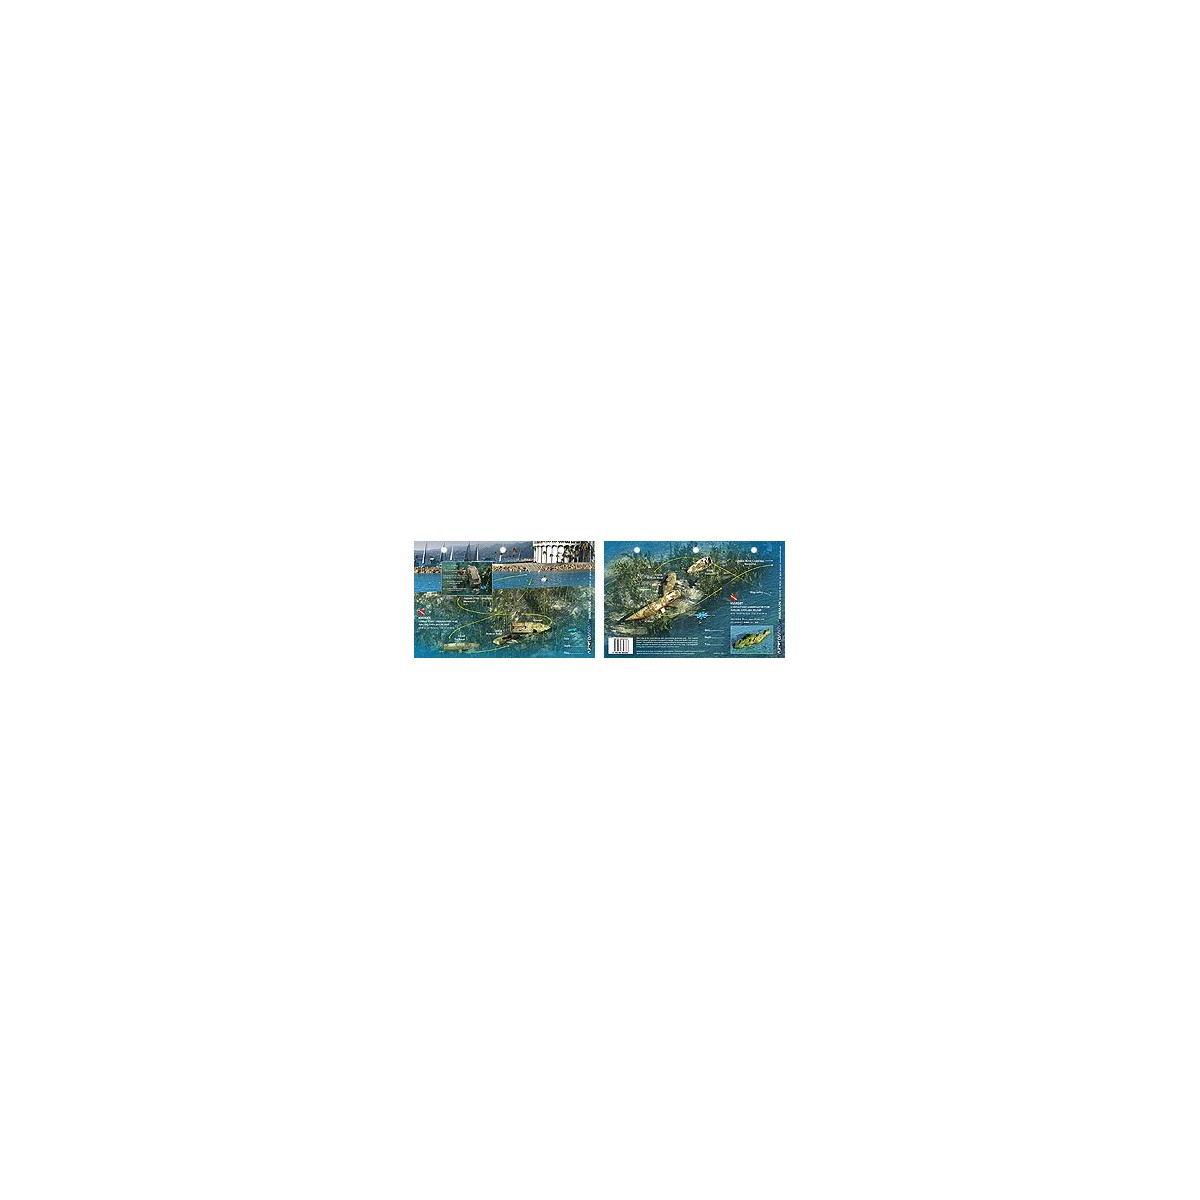 Kimset in Catalina Island, California (8.5 x 5.5 Inches) (21.6 x 15cm) - New Art to Media Underwater Waterproof 3D Dive Site Map